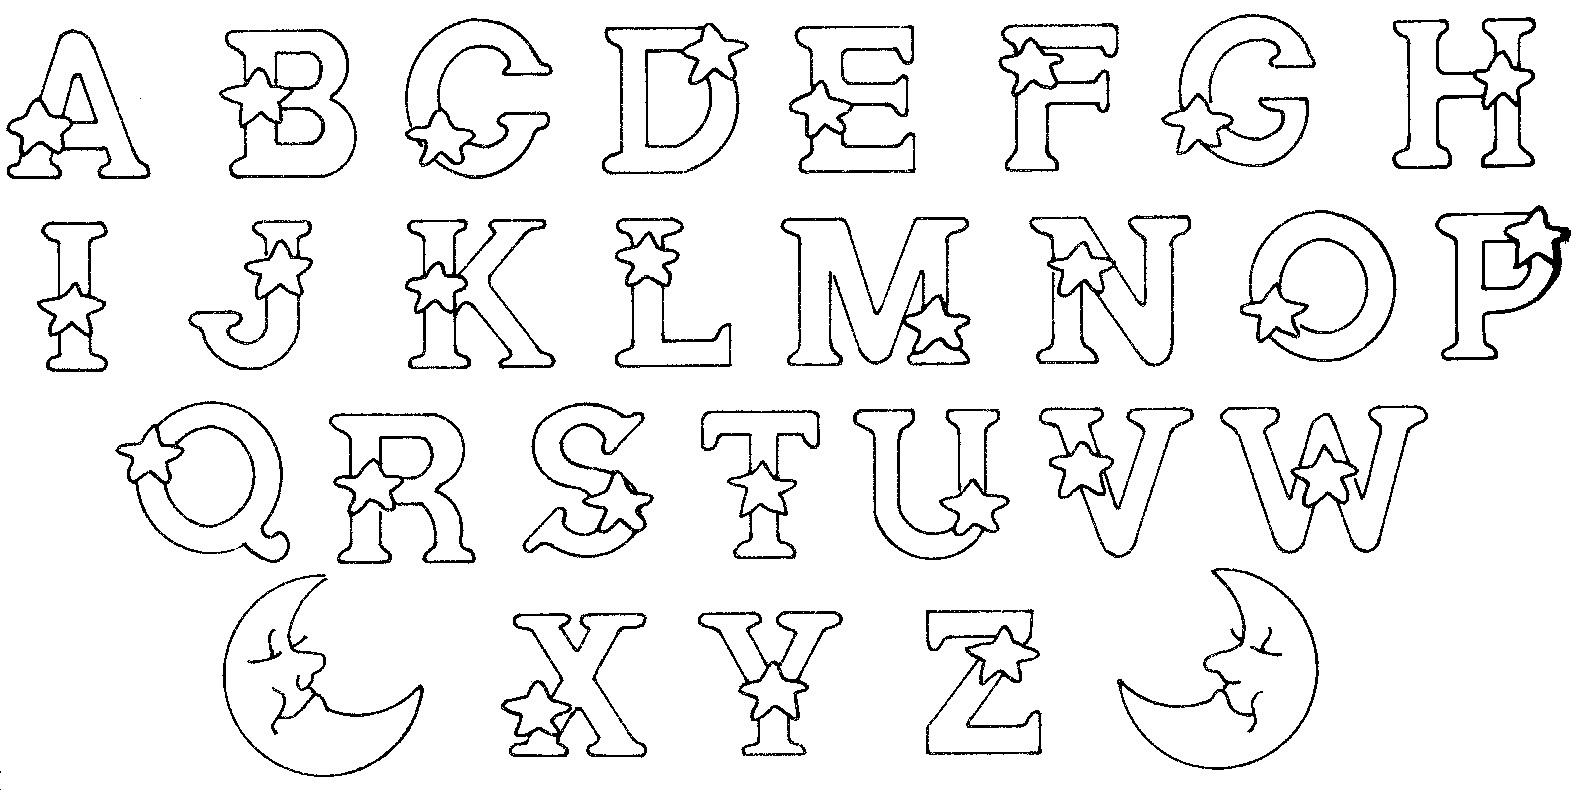 beautiful letters of the alphabet